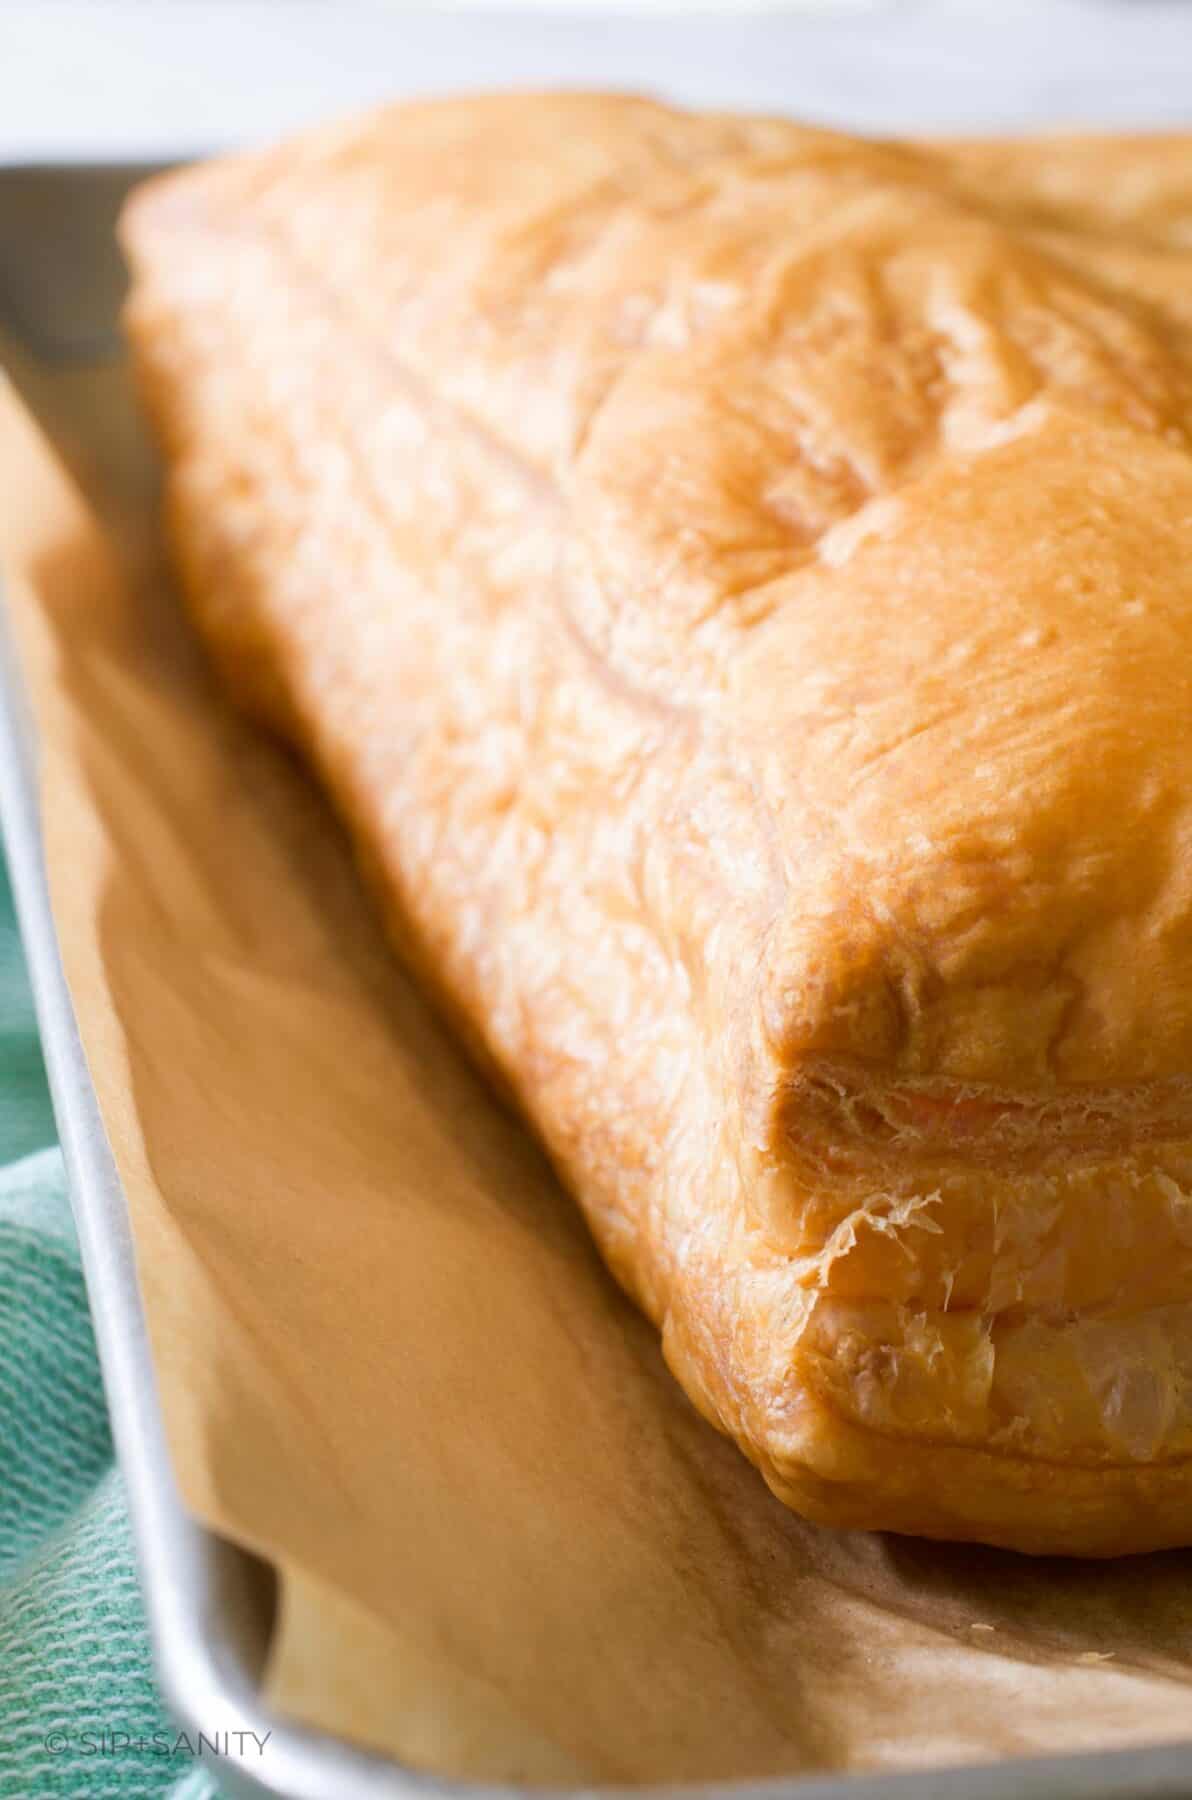 A whole sheet of puff pastry on a sheet pan that has been baked into a giant puff.